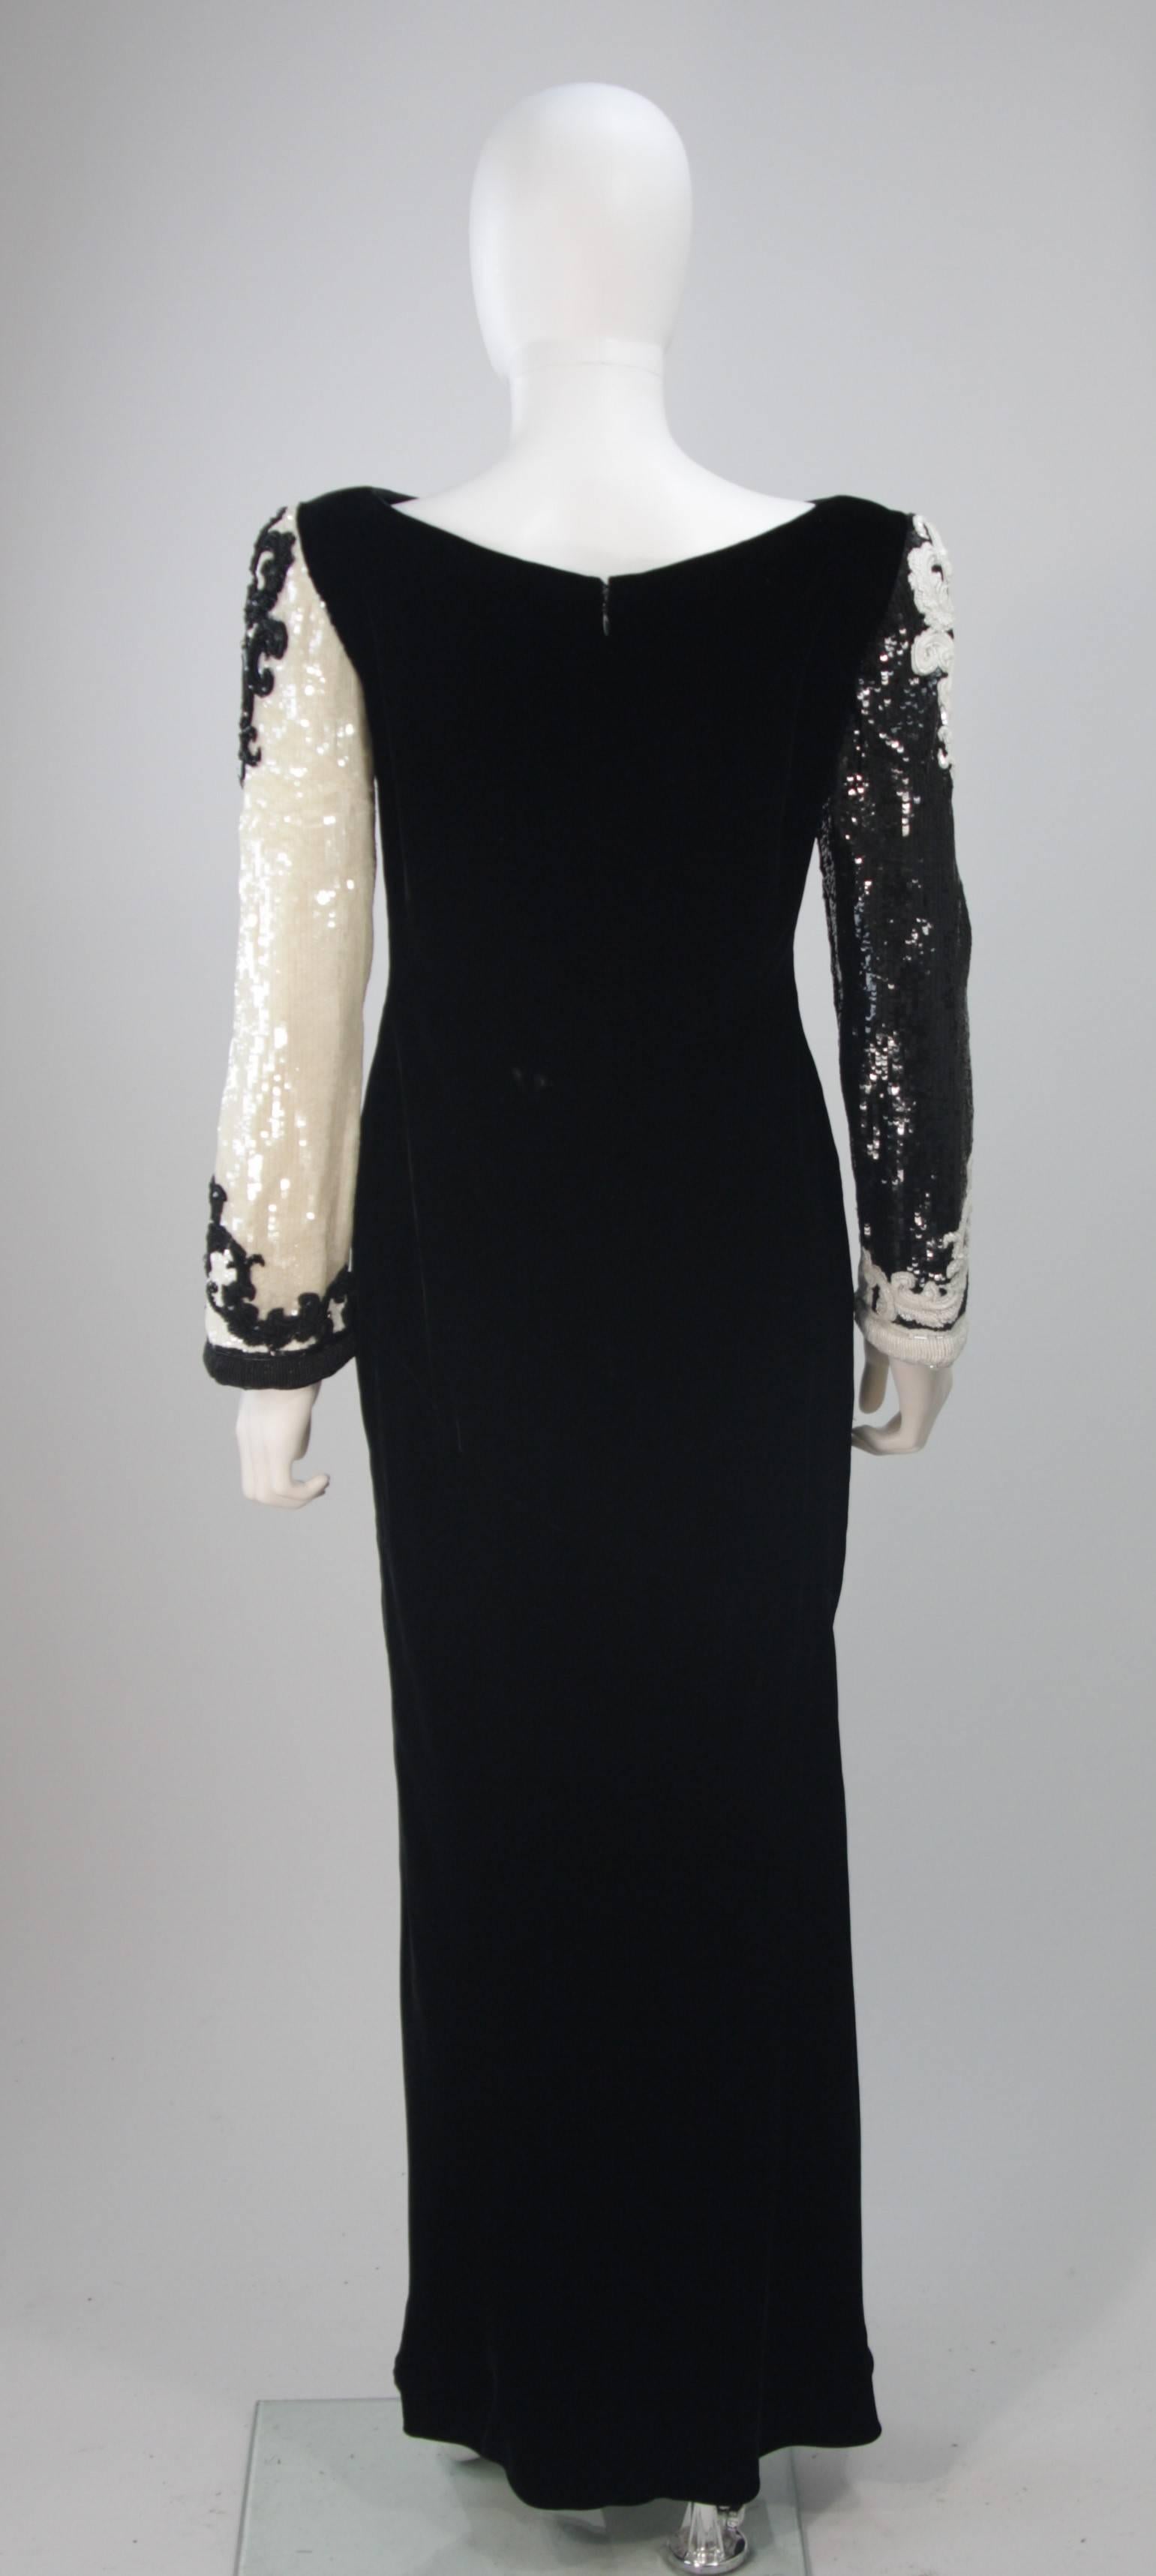 BILL BLASS Color Block Contrast Velvet Gown wth Sequin & Beaded Sleeves Size 6-8 For Sale 1